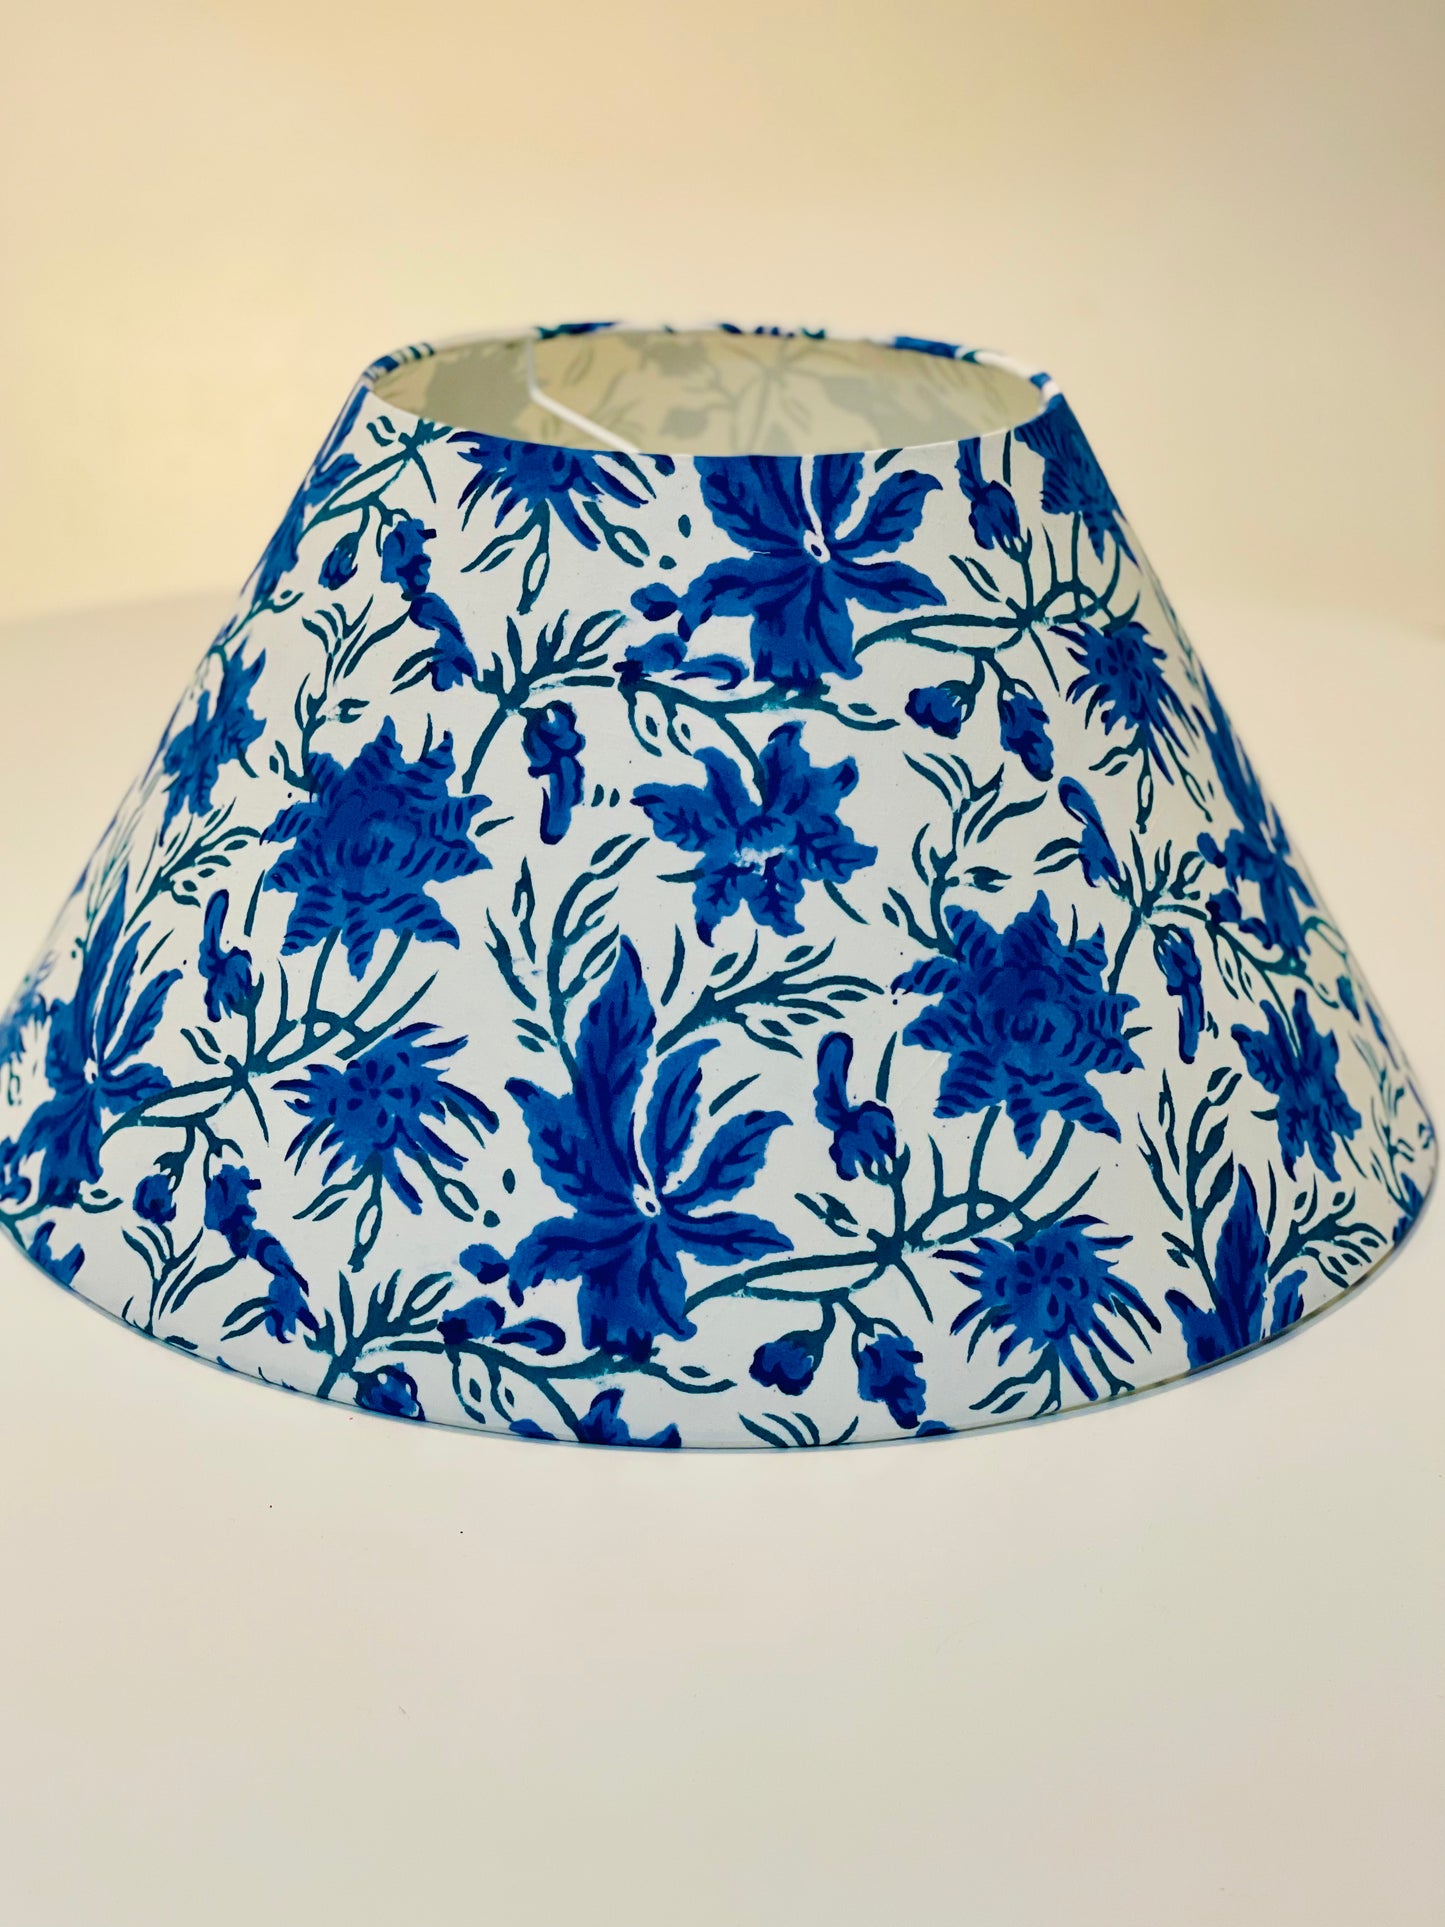 Large Conical Lampshade. Hand Block Print from India. Bright Blue and Dark Teal Floral.